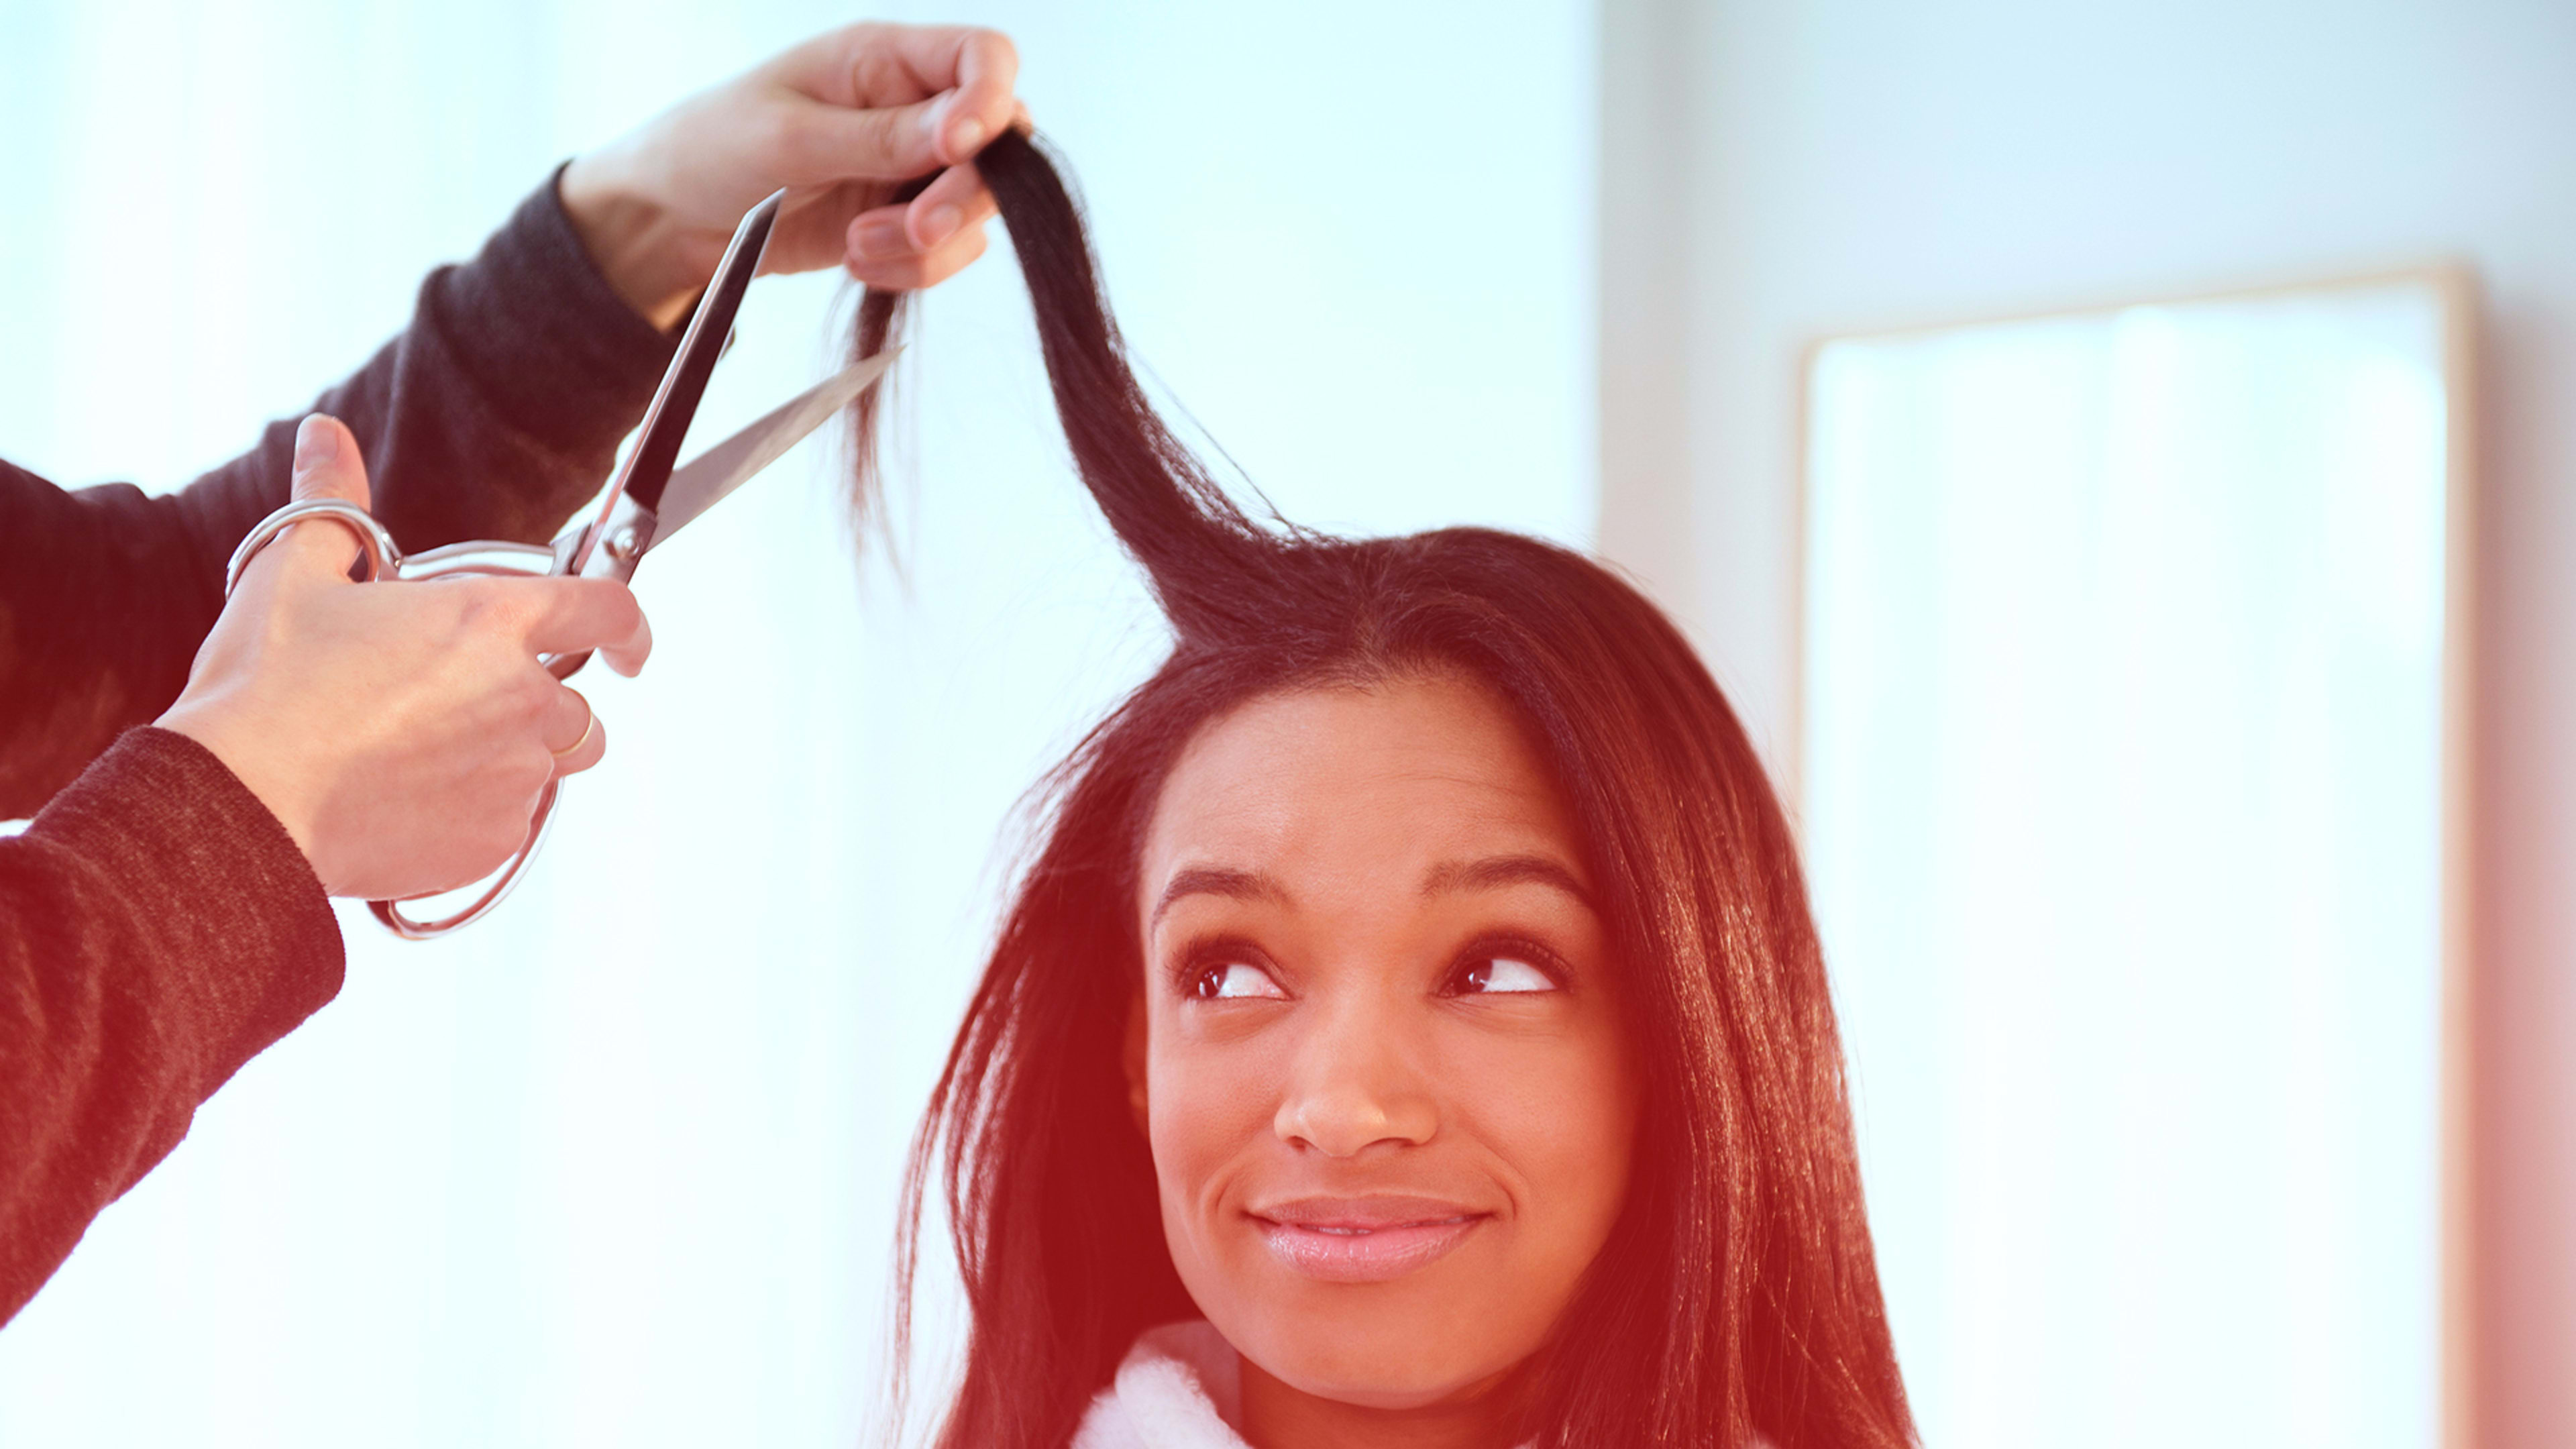 This App Wants To Save Black Women From Stylists Ruining Their Hair